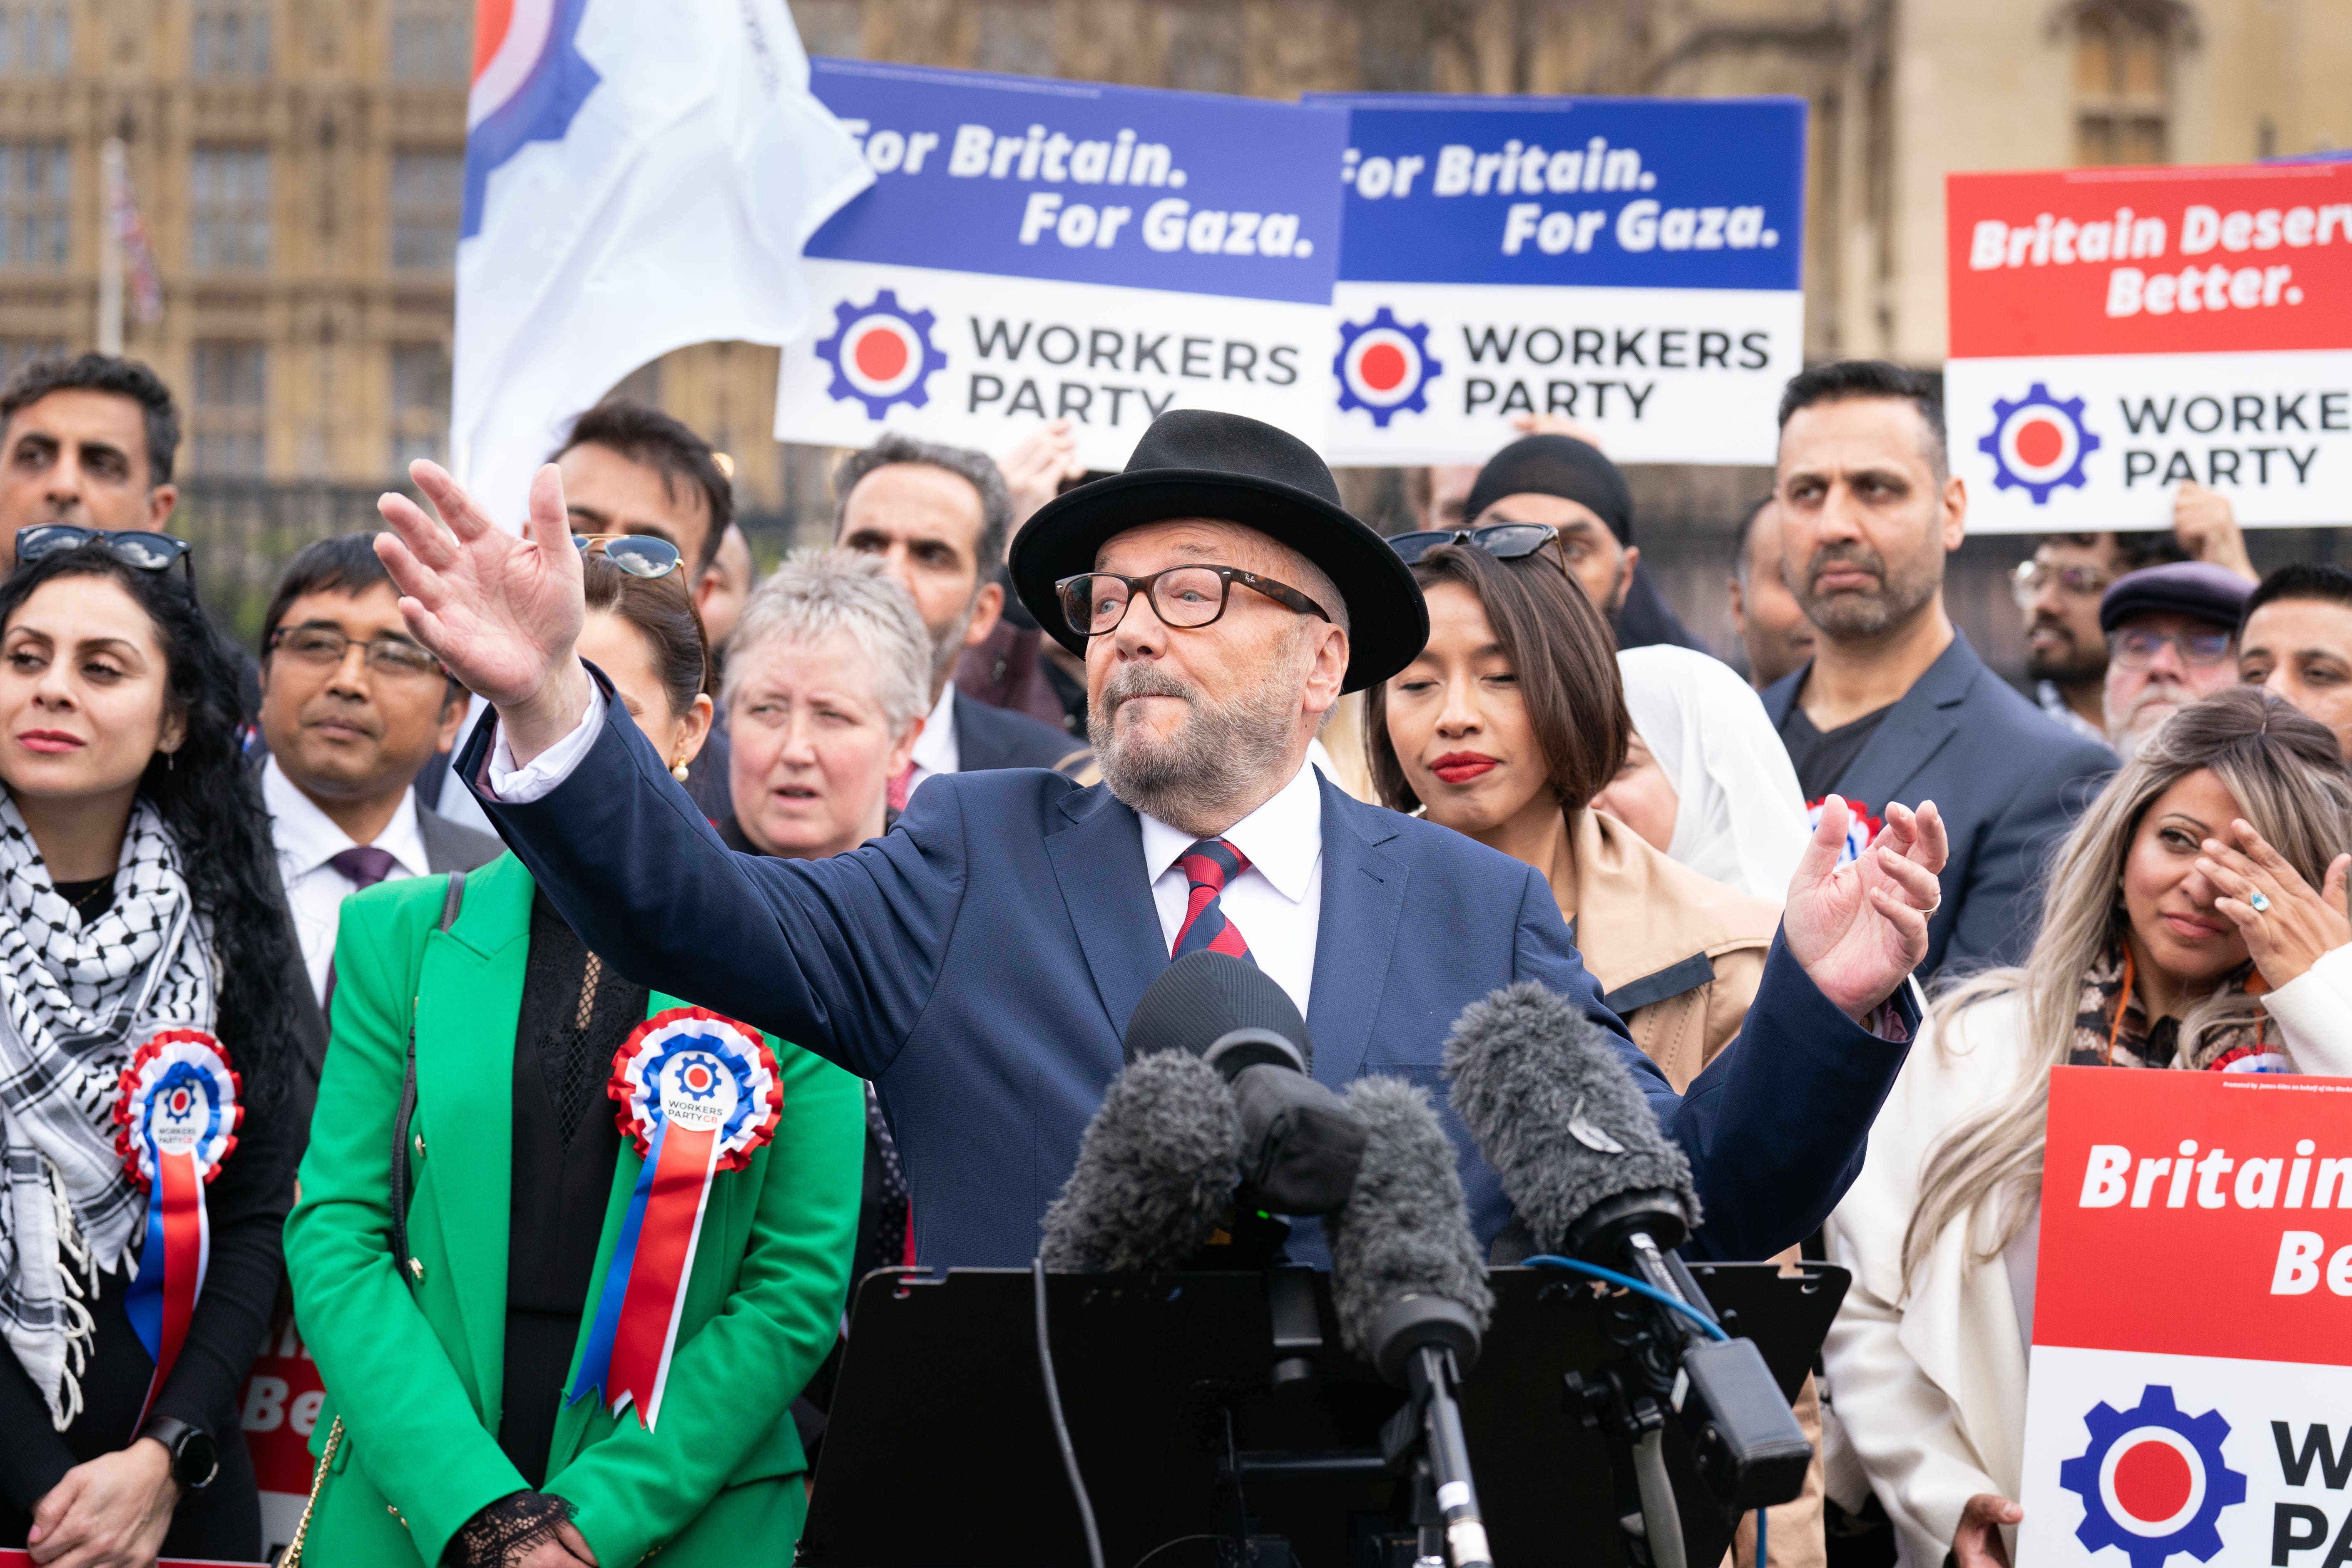 George Galloway said he had 500 candidates already lined up to fight a general election